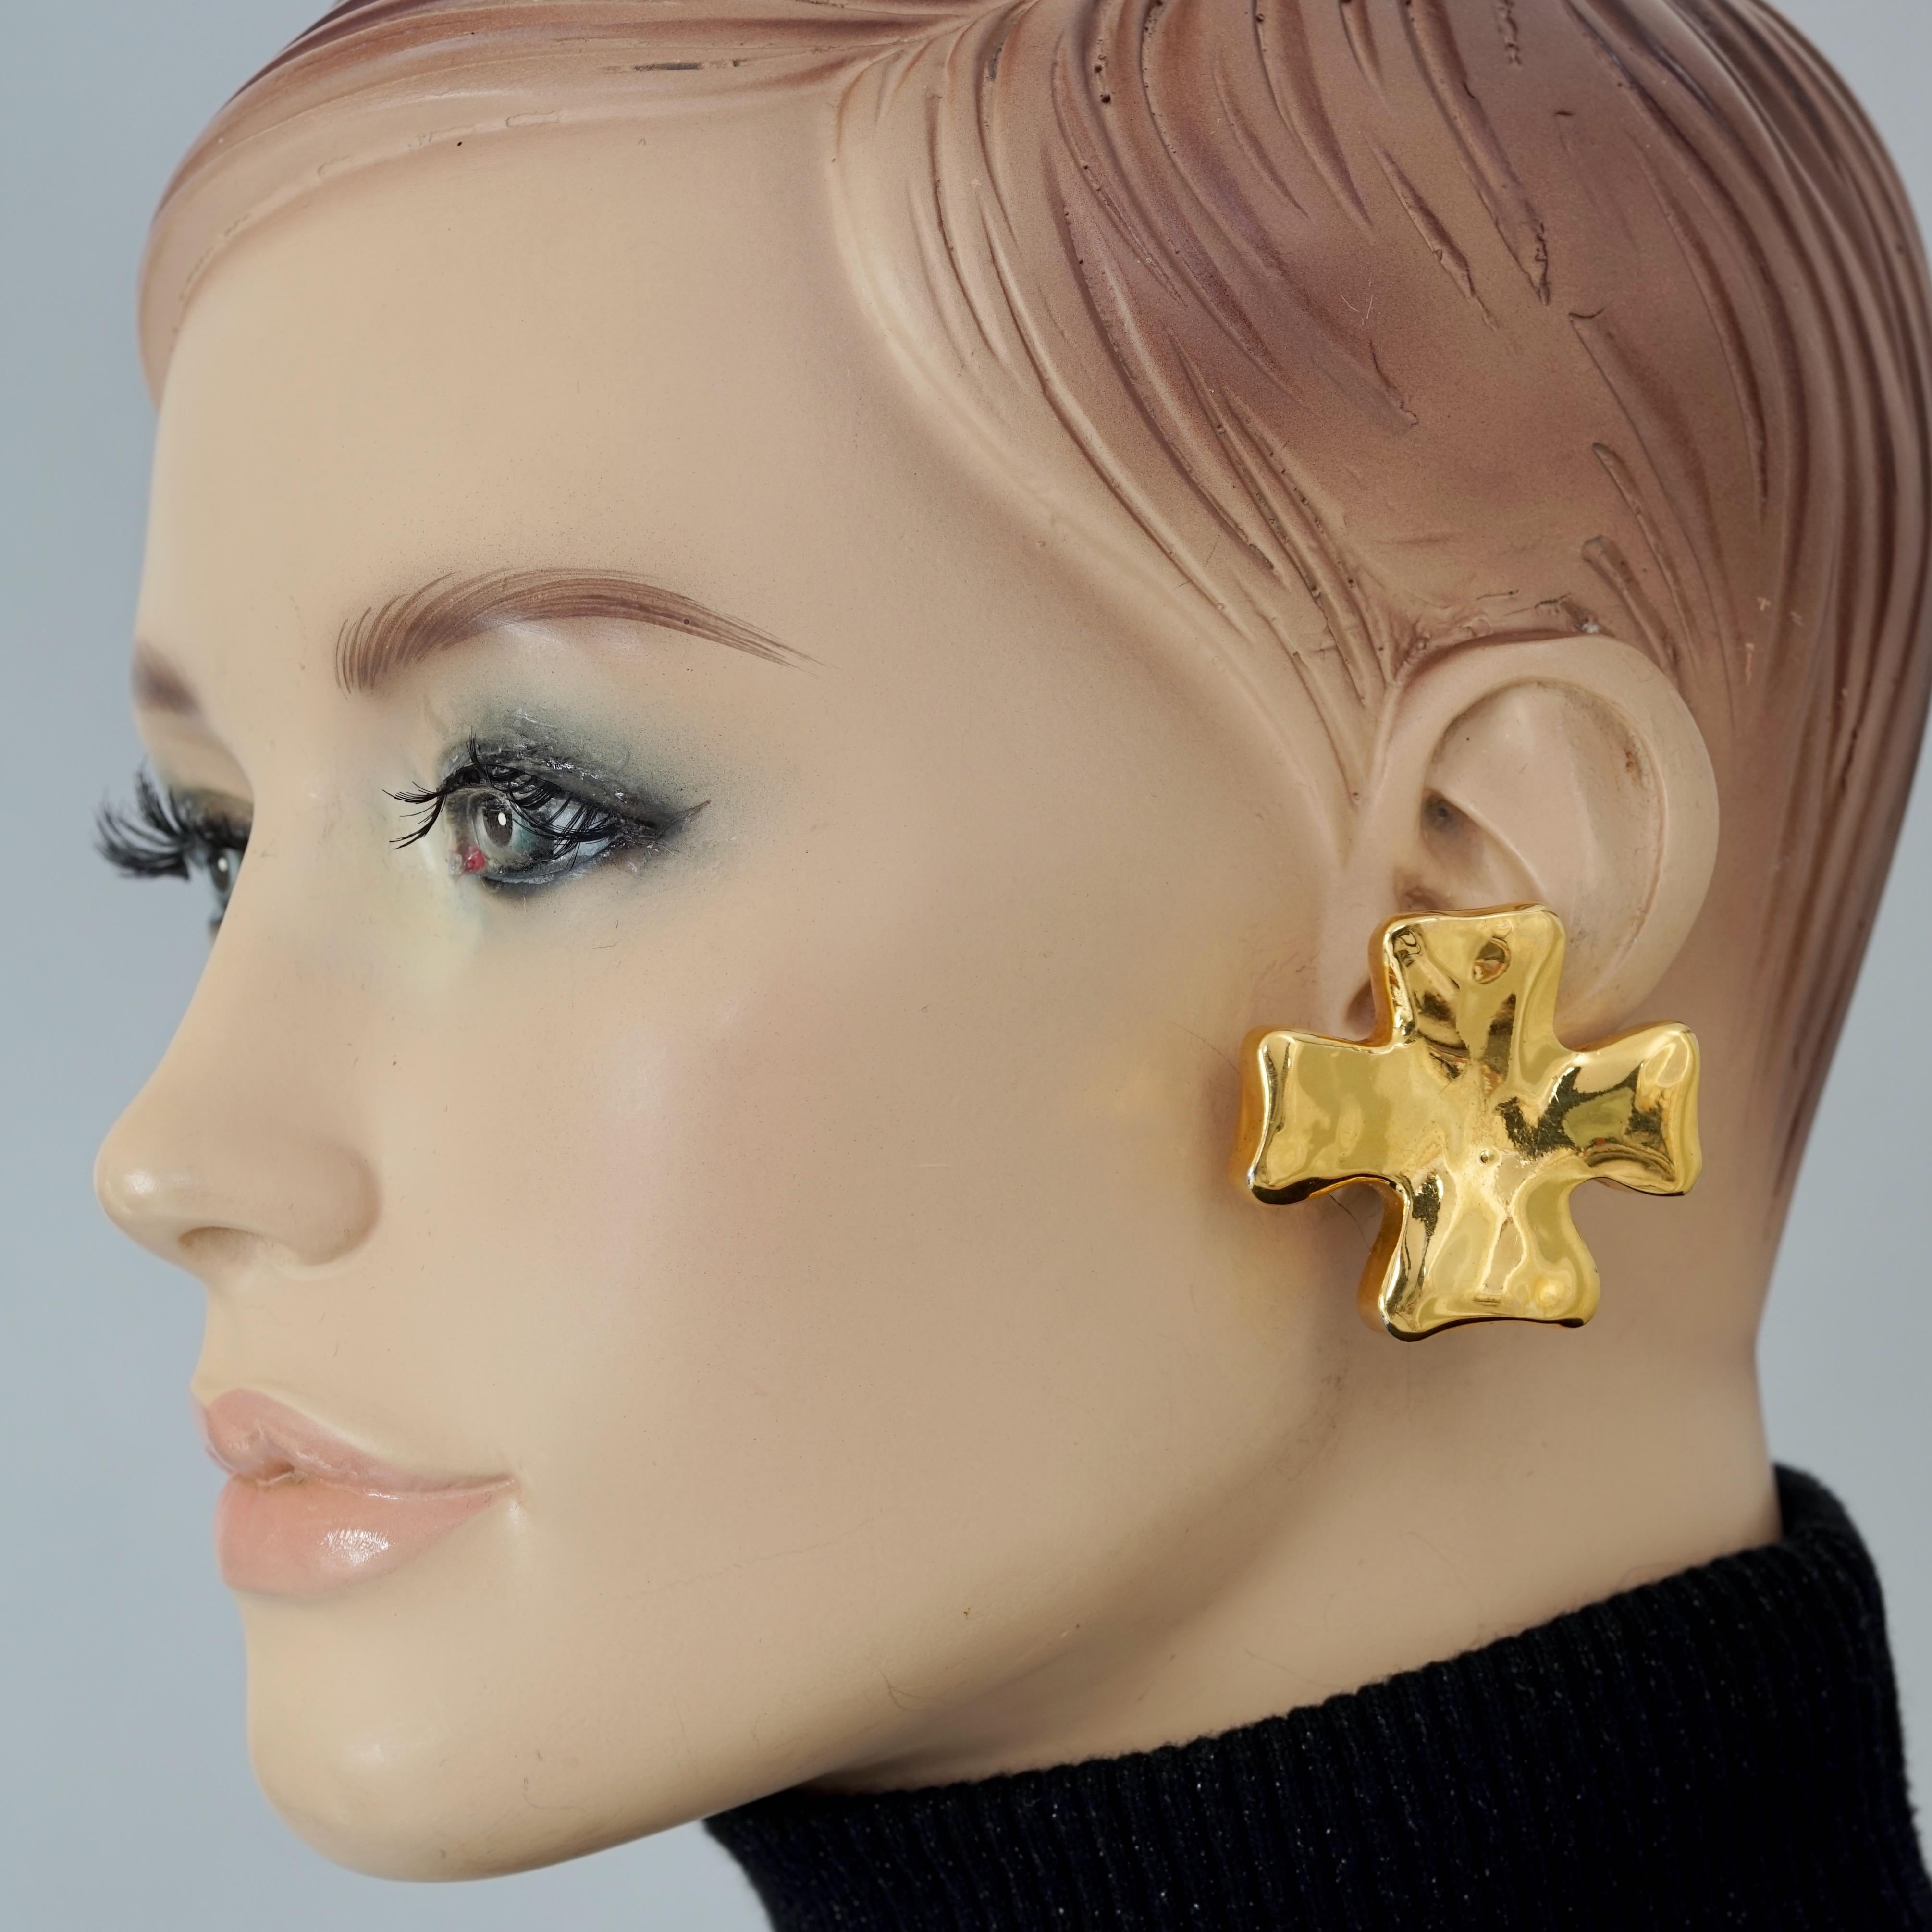 Vintage CHRISTIAN LACROIX Massive Cross Gold Earrings

Measurements:
Height: 1.57 inches (4 cm)
Width: 1.73 inches (4.4 cm)
Weight per Earring: 15 grams

Features:
- 100% Authentic CHRISTIAN LACROIX.
- Massive and lightweight cross earrings.
- Clip